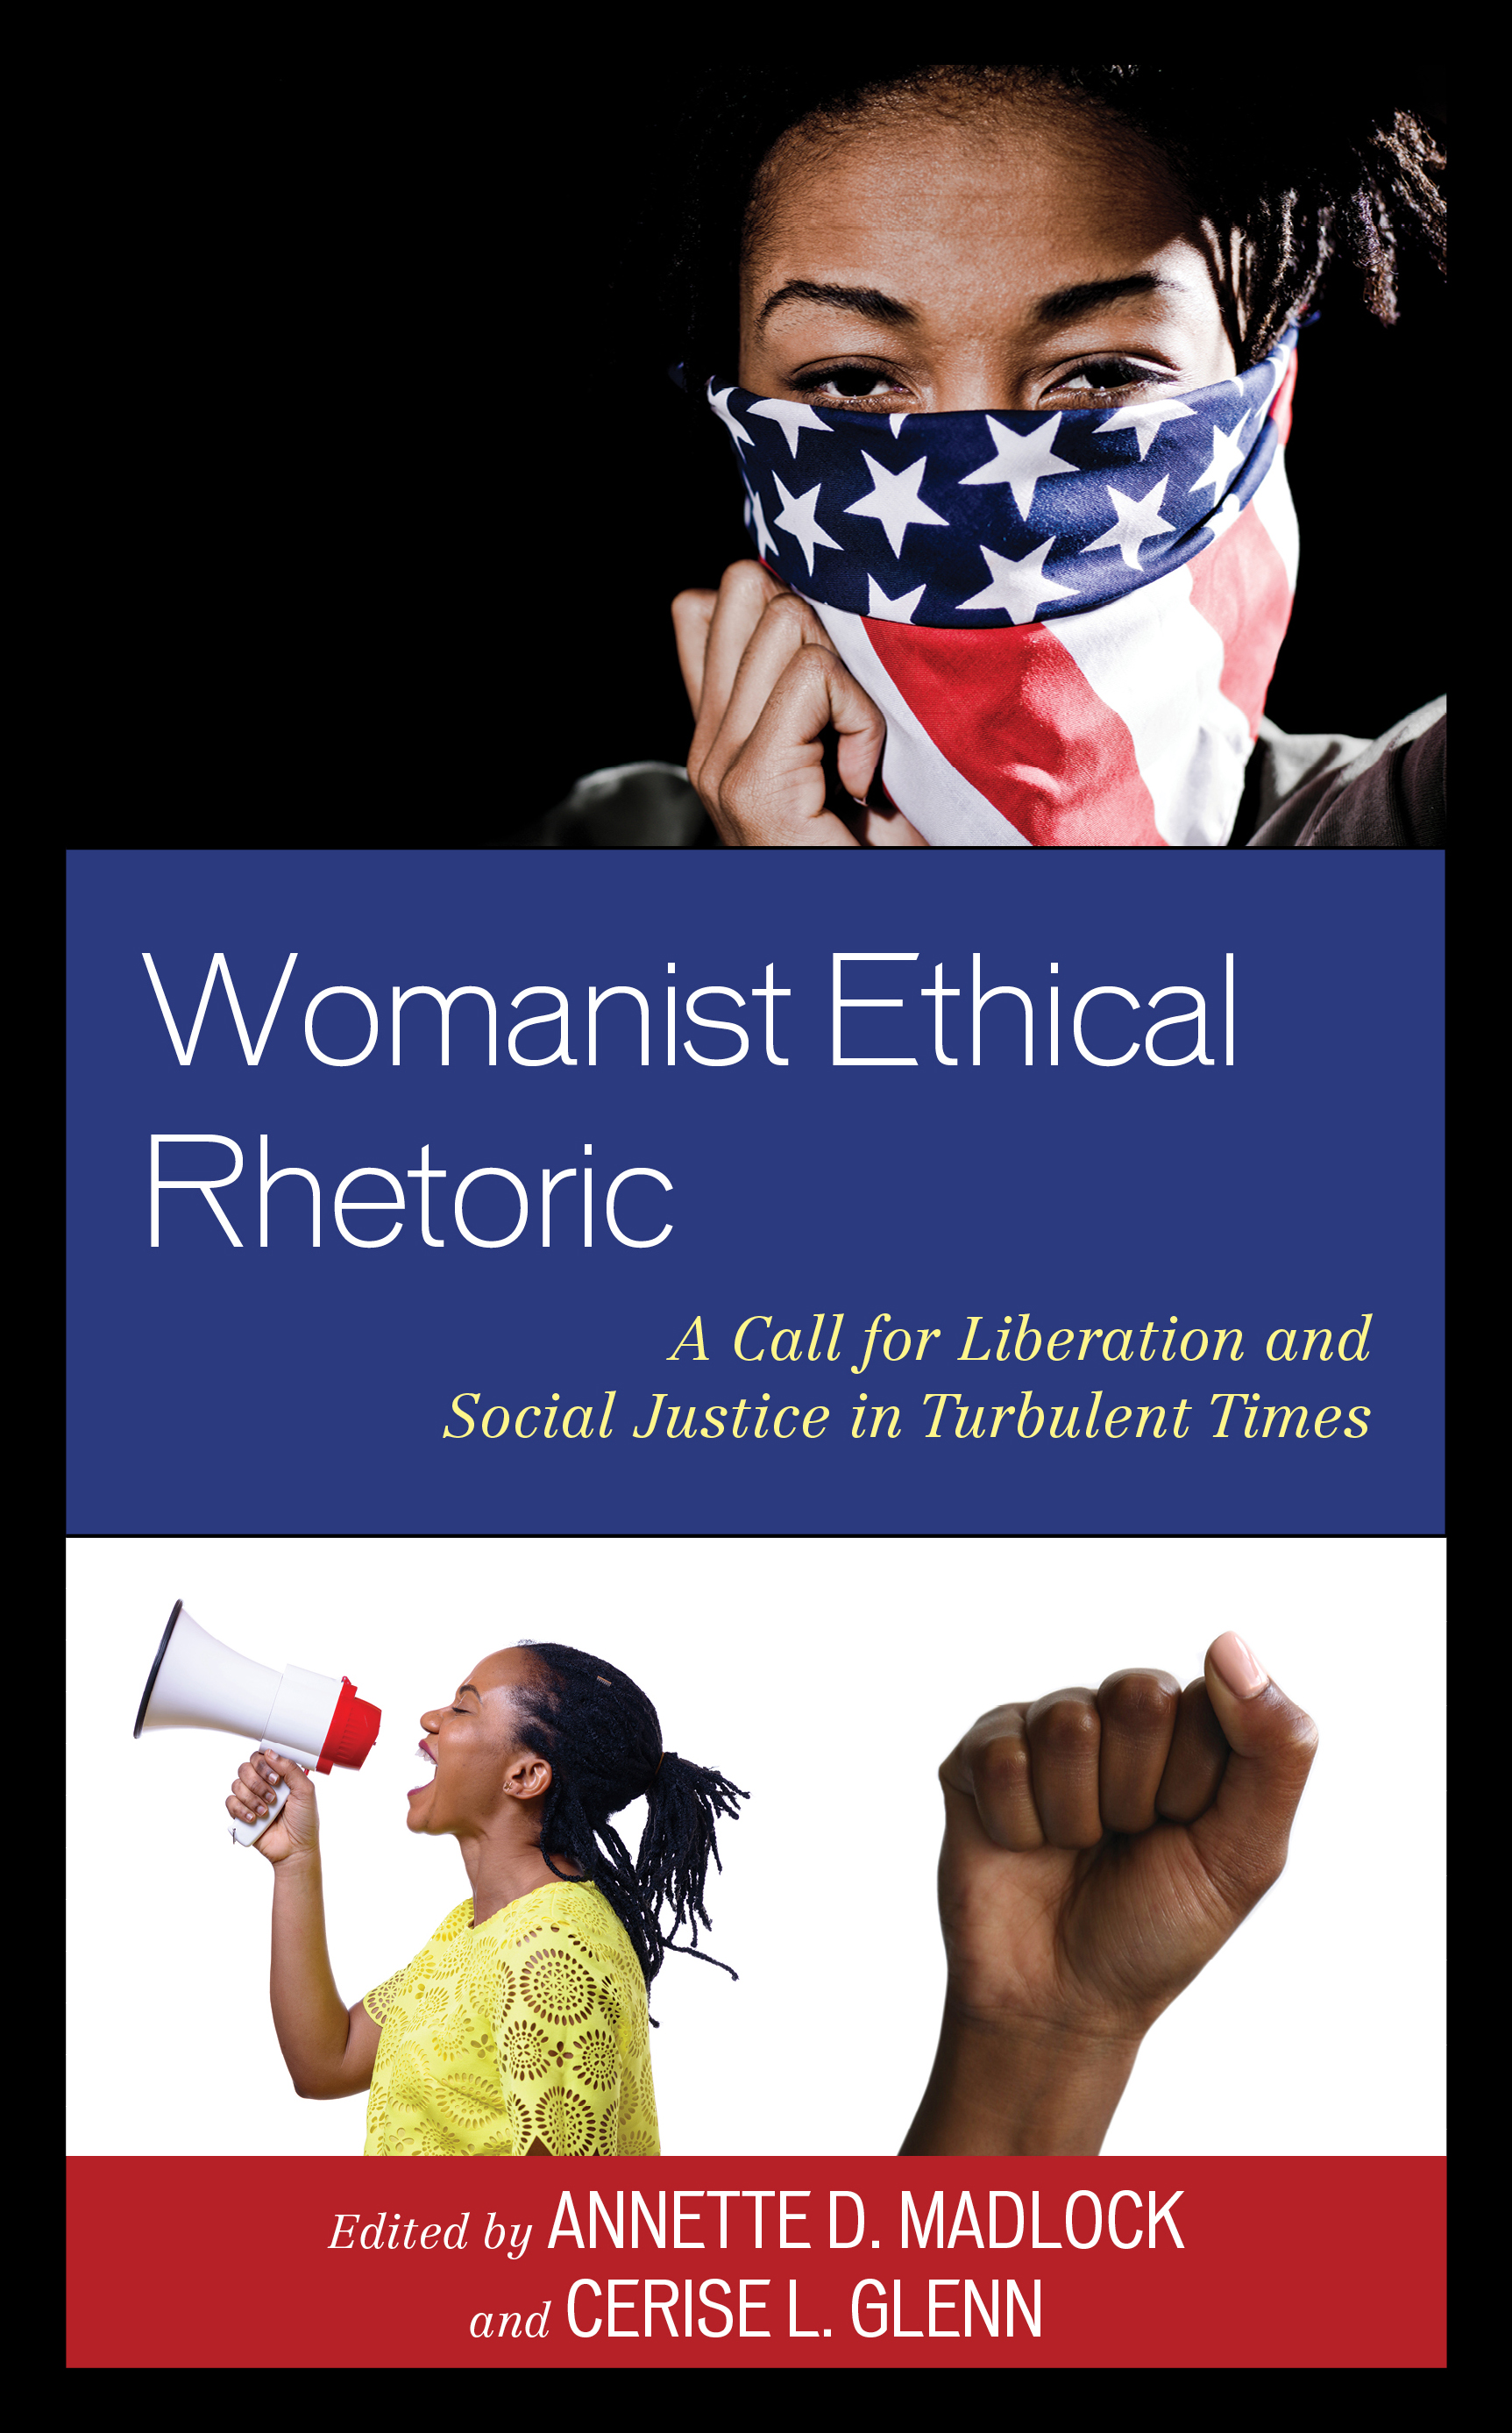 Womanist Ethical Rhetoric: A Call for Liberation and Social Justice in Turbulent Times